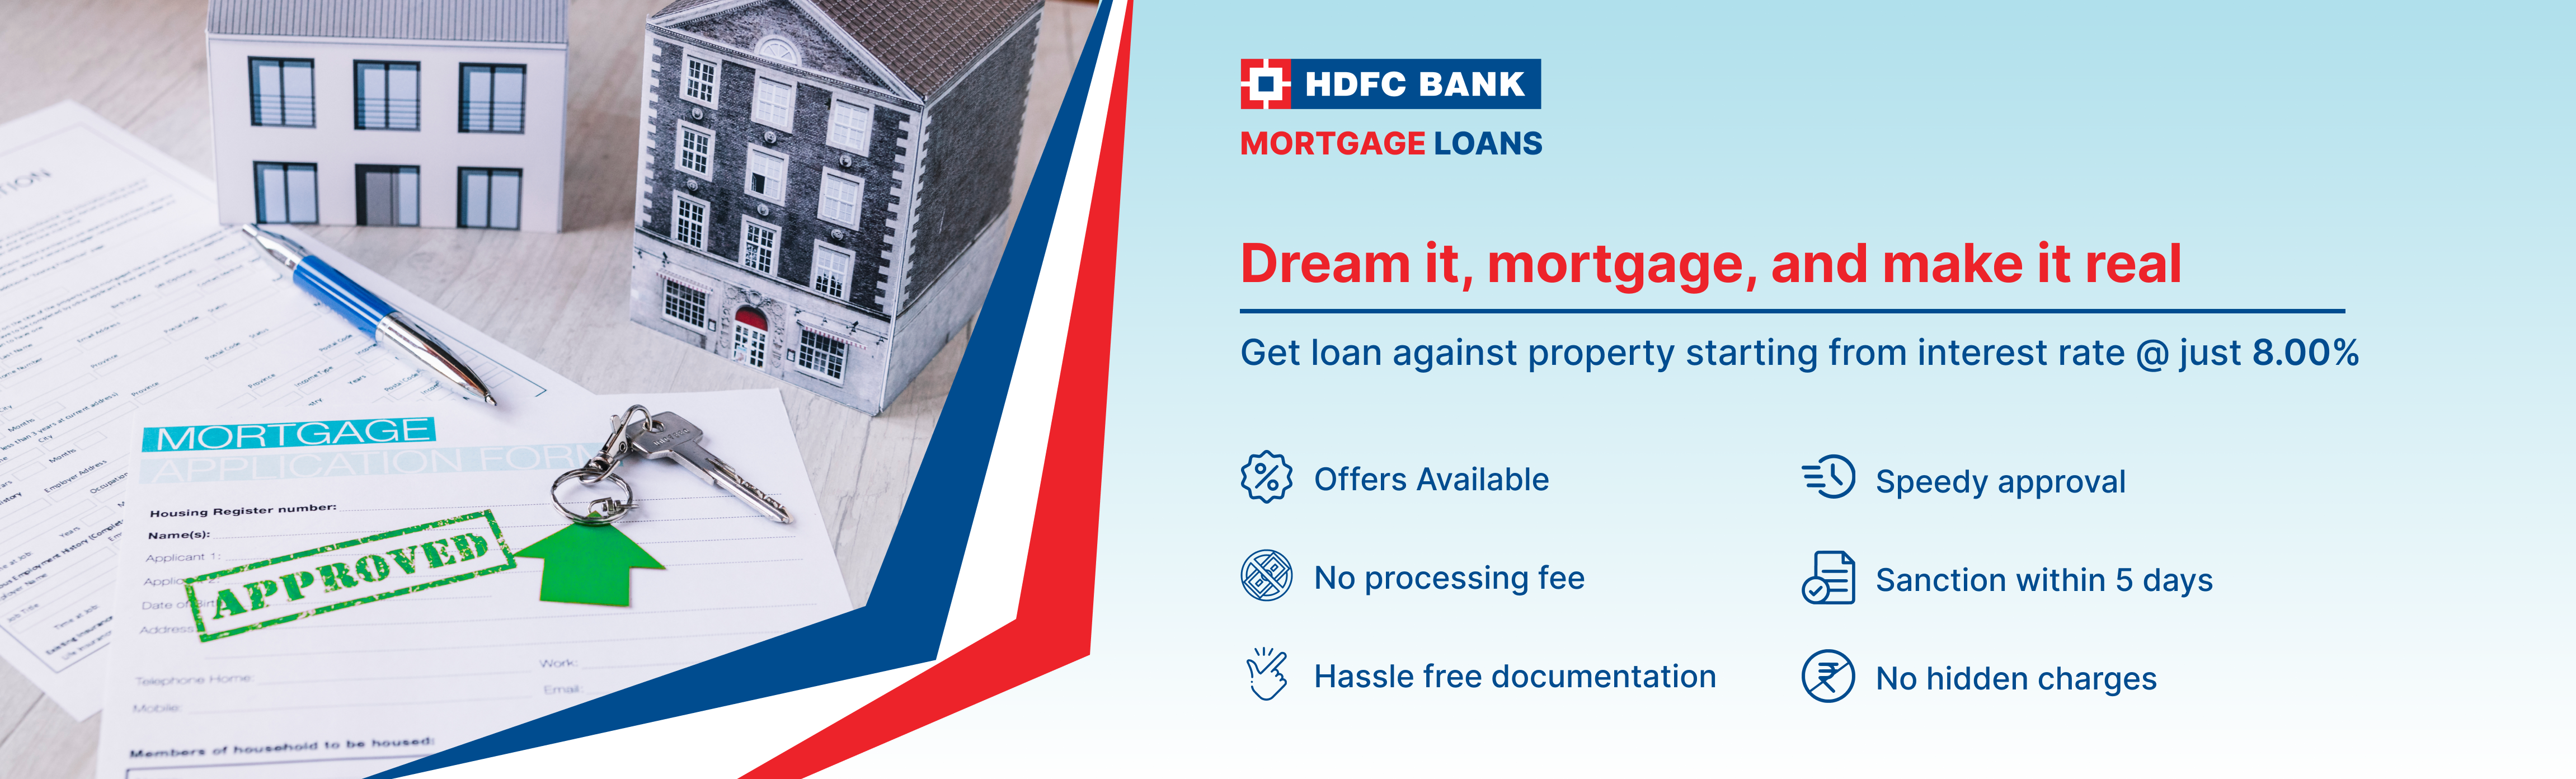 HDFC Bank - Mortgage Loans - Dream it, mortgage, and make it real